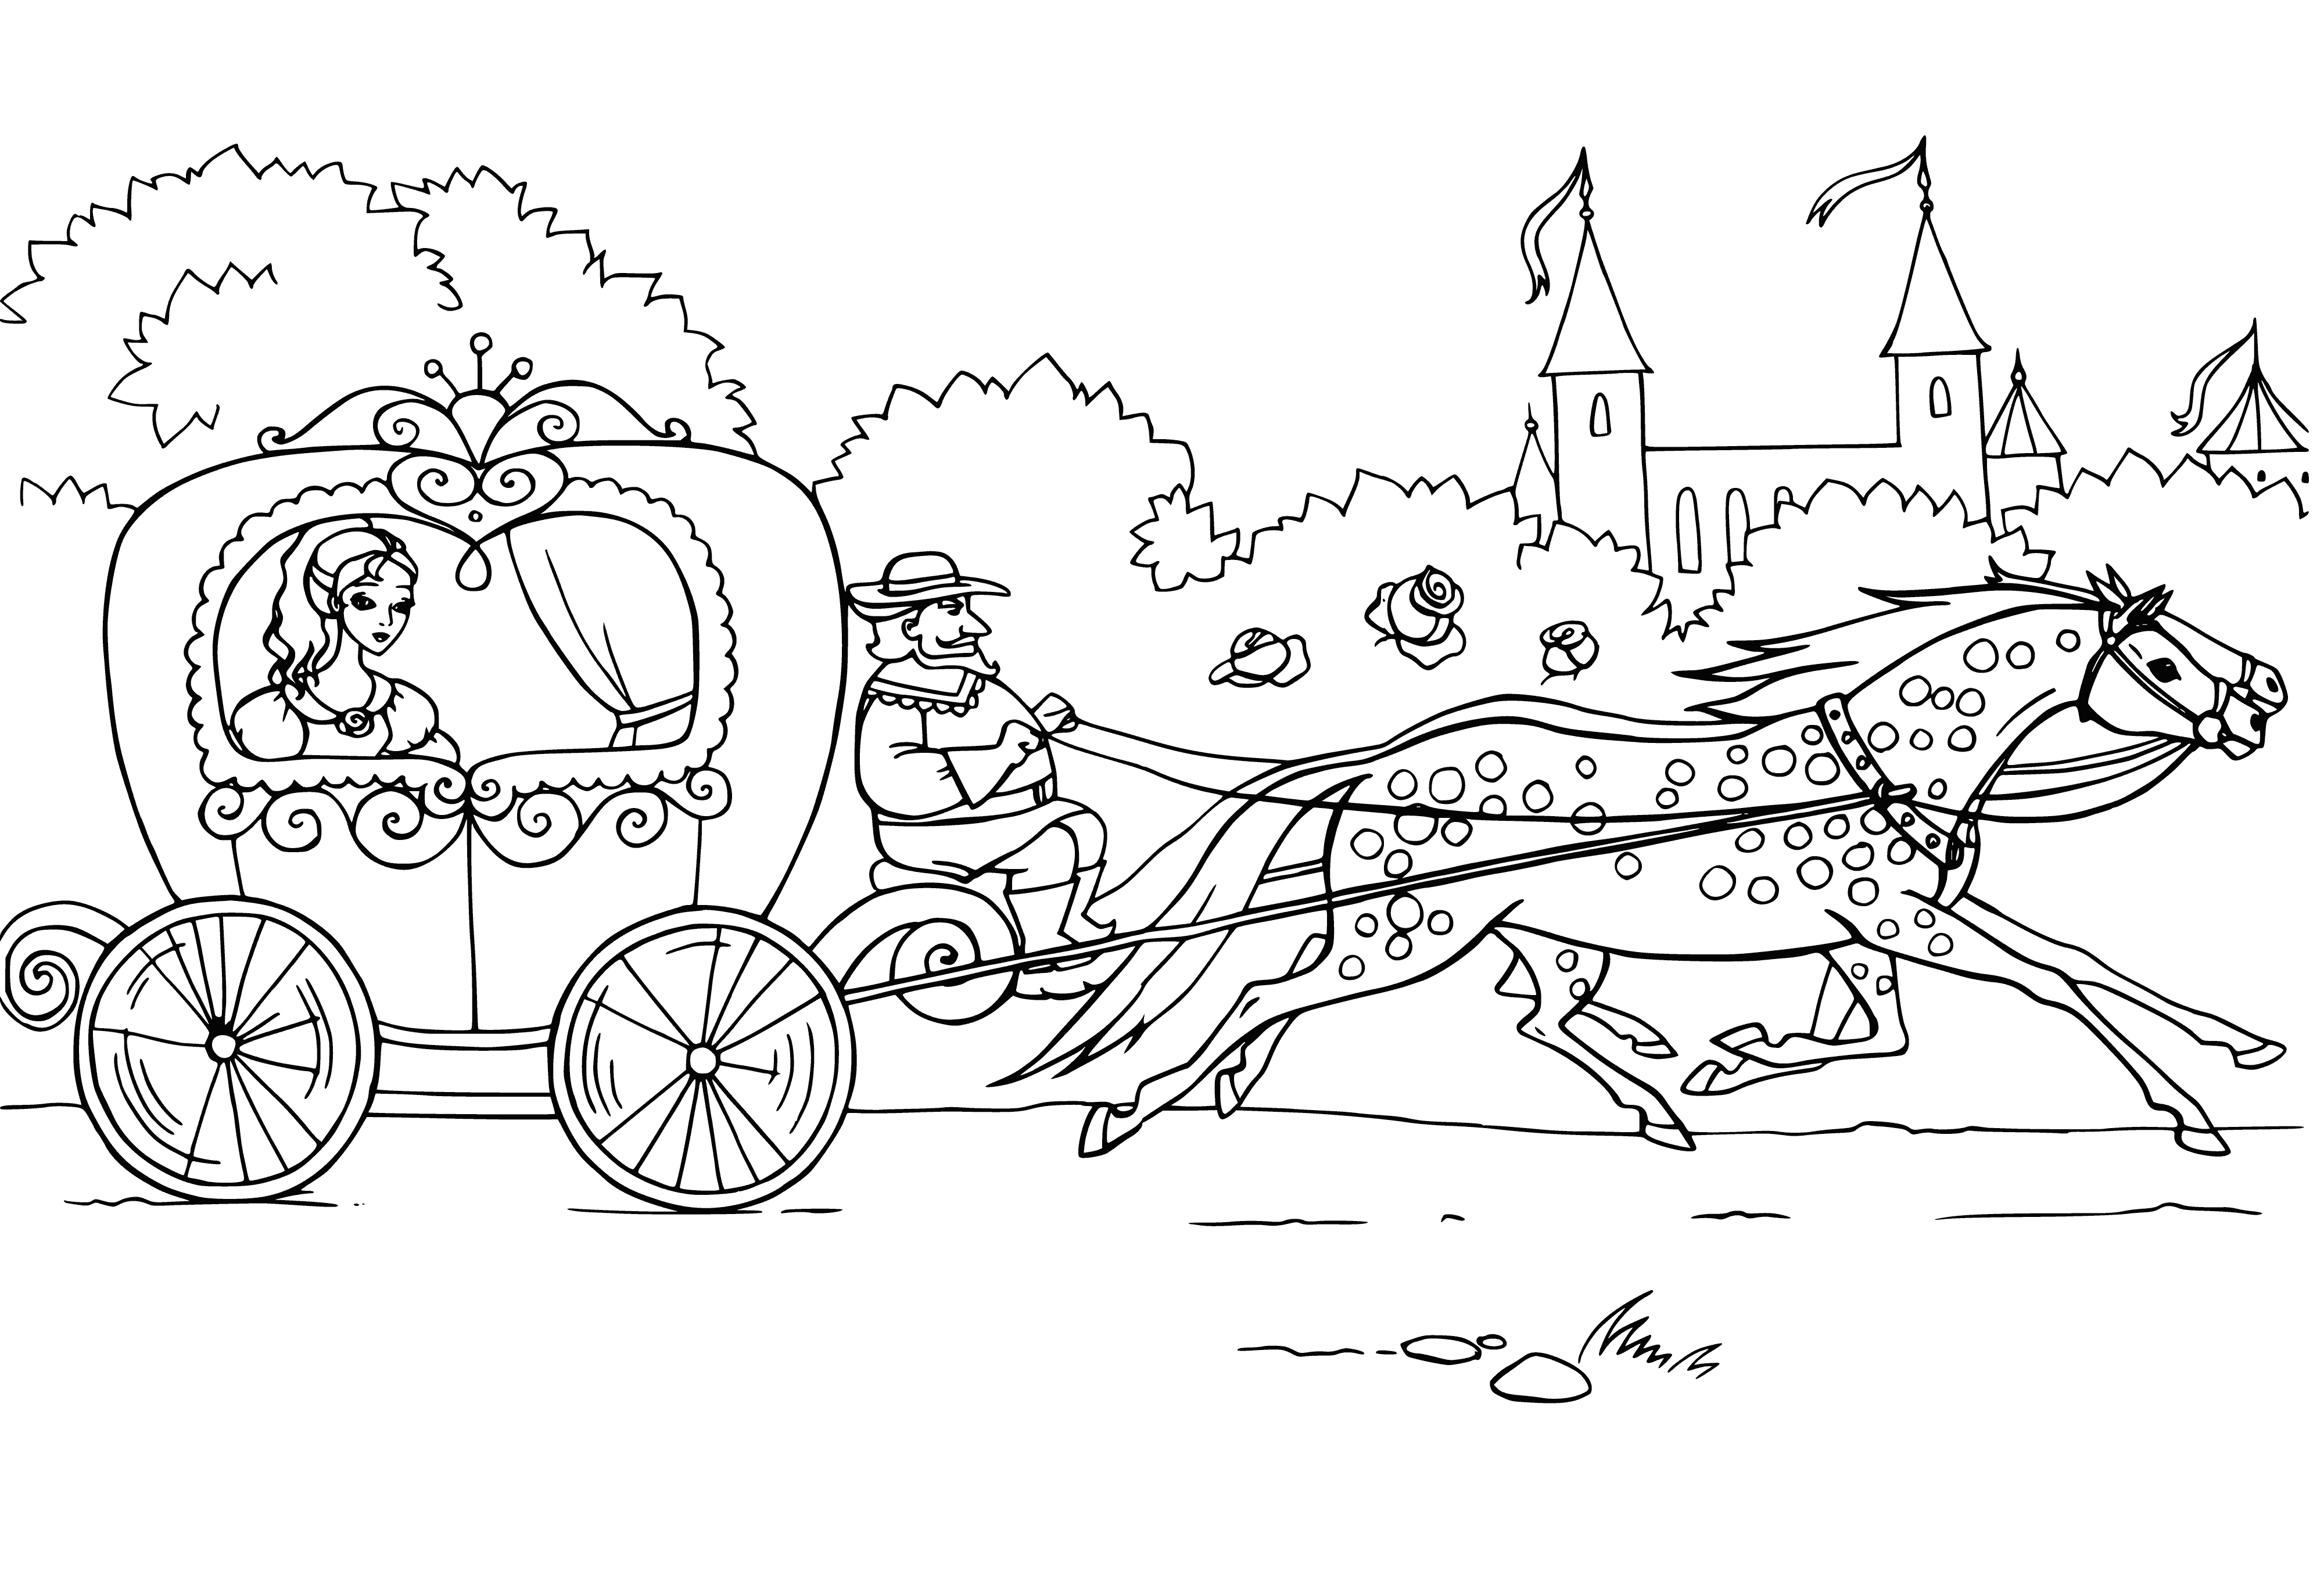 coloring page: A large palace with an open gate leads to an enchanted garden with a path to another world.